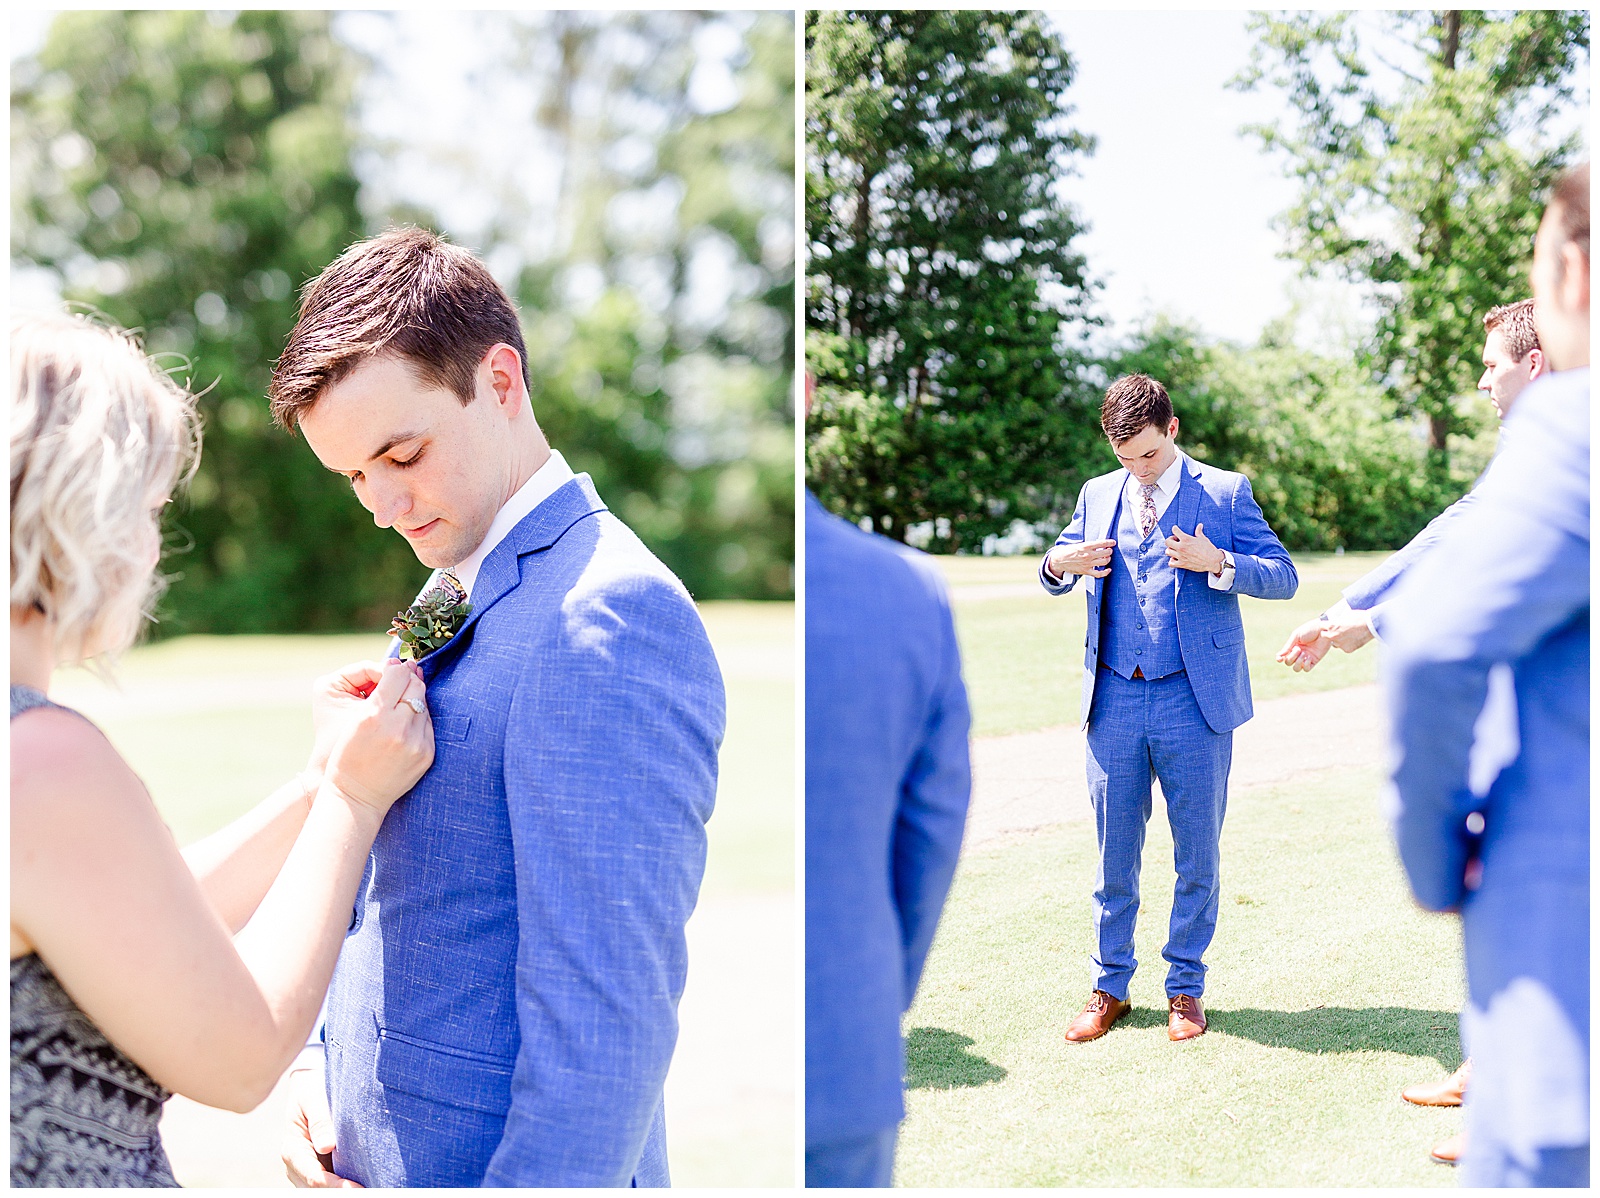 Blue Themed Suit Groomsmen getting ready at Outdoorsy Summer Wedding at North Carolina Lakehouse in the Mountains | check out the full wedding at KevynDixonPhoto.com